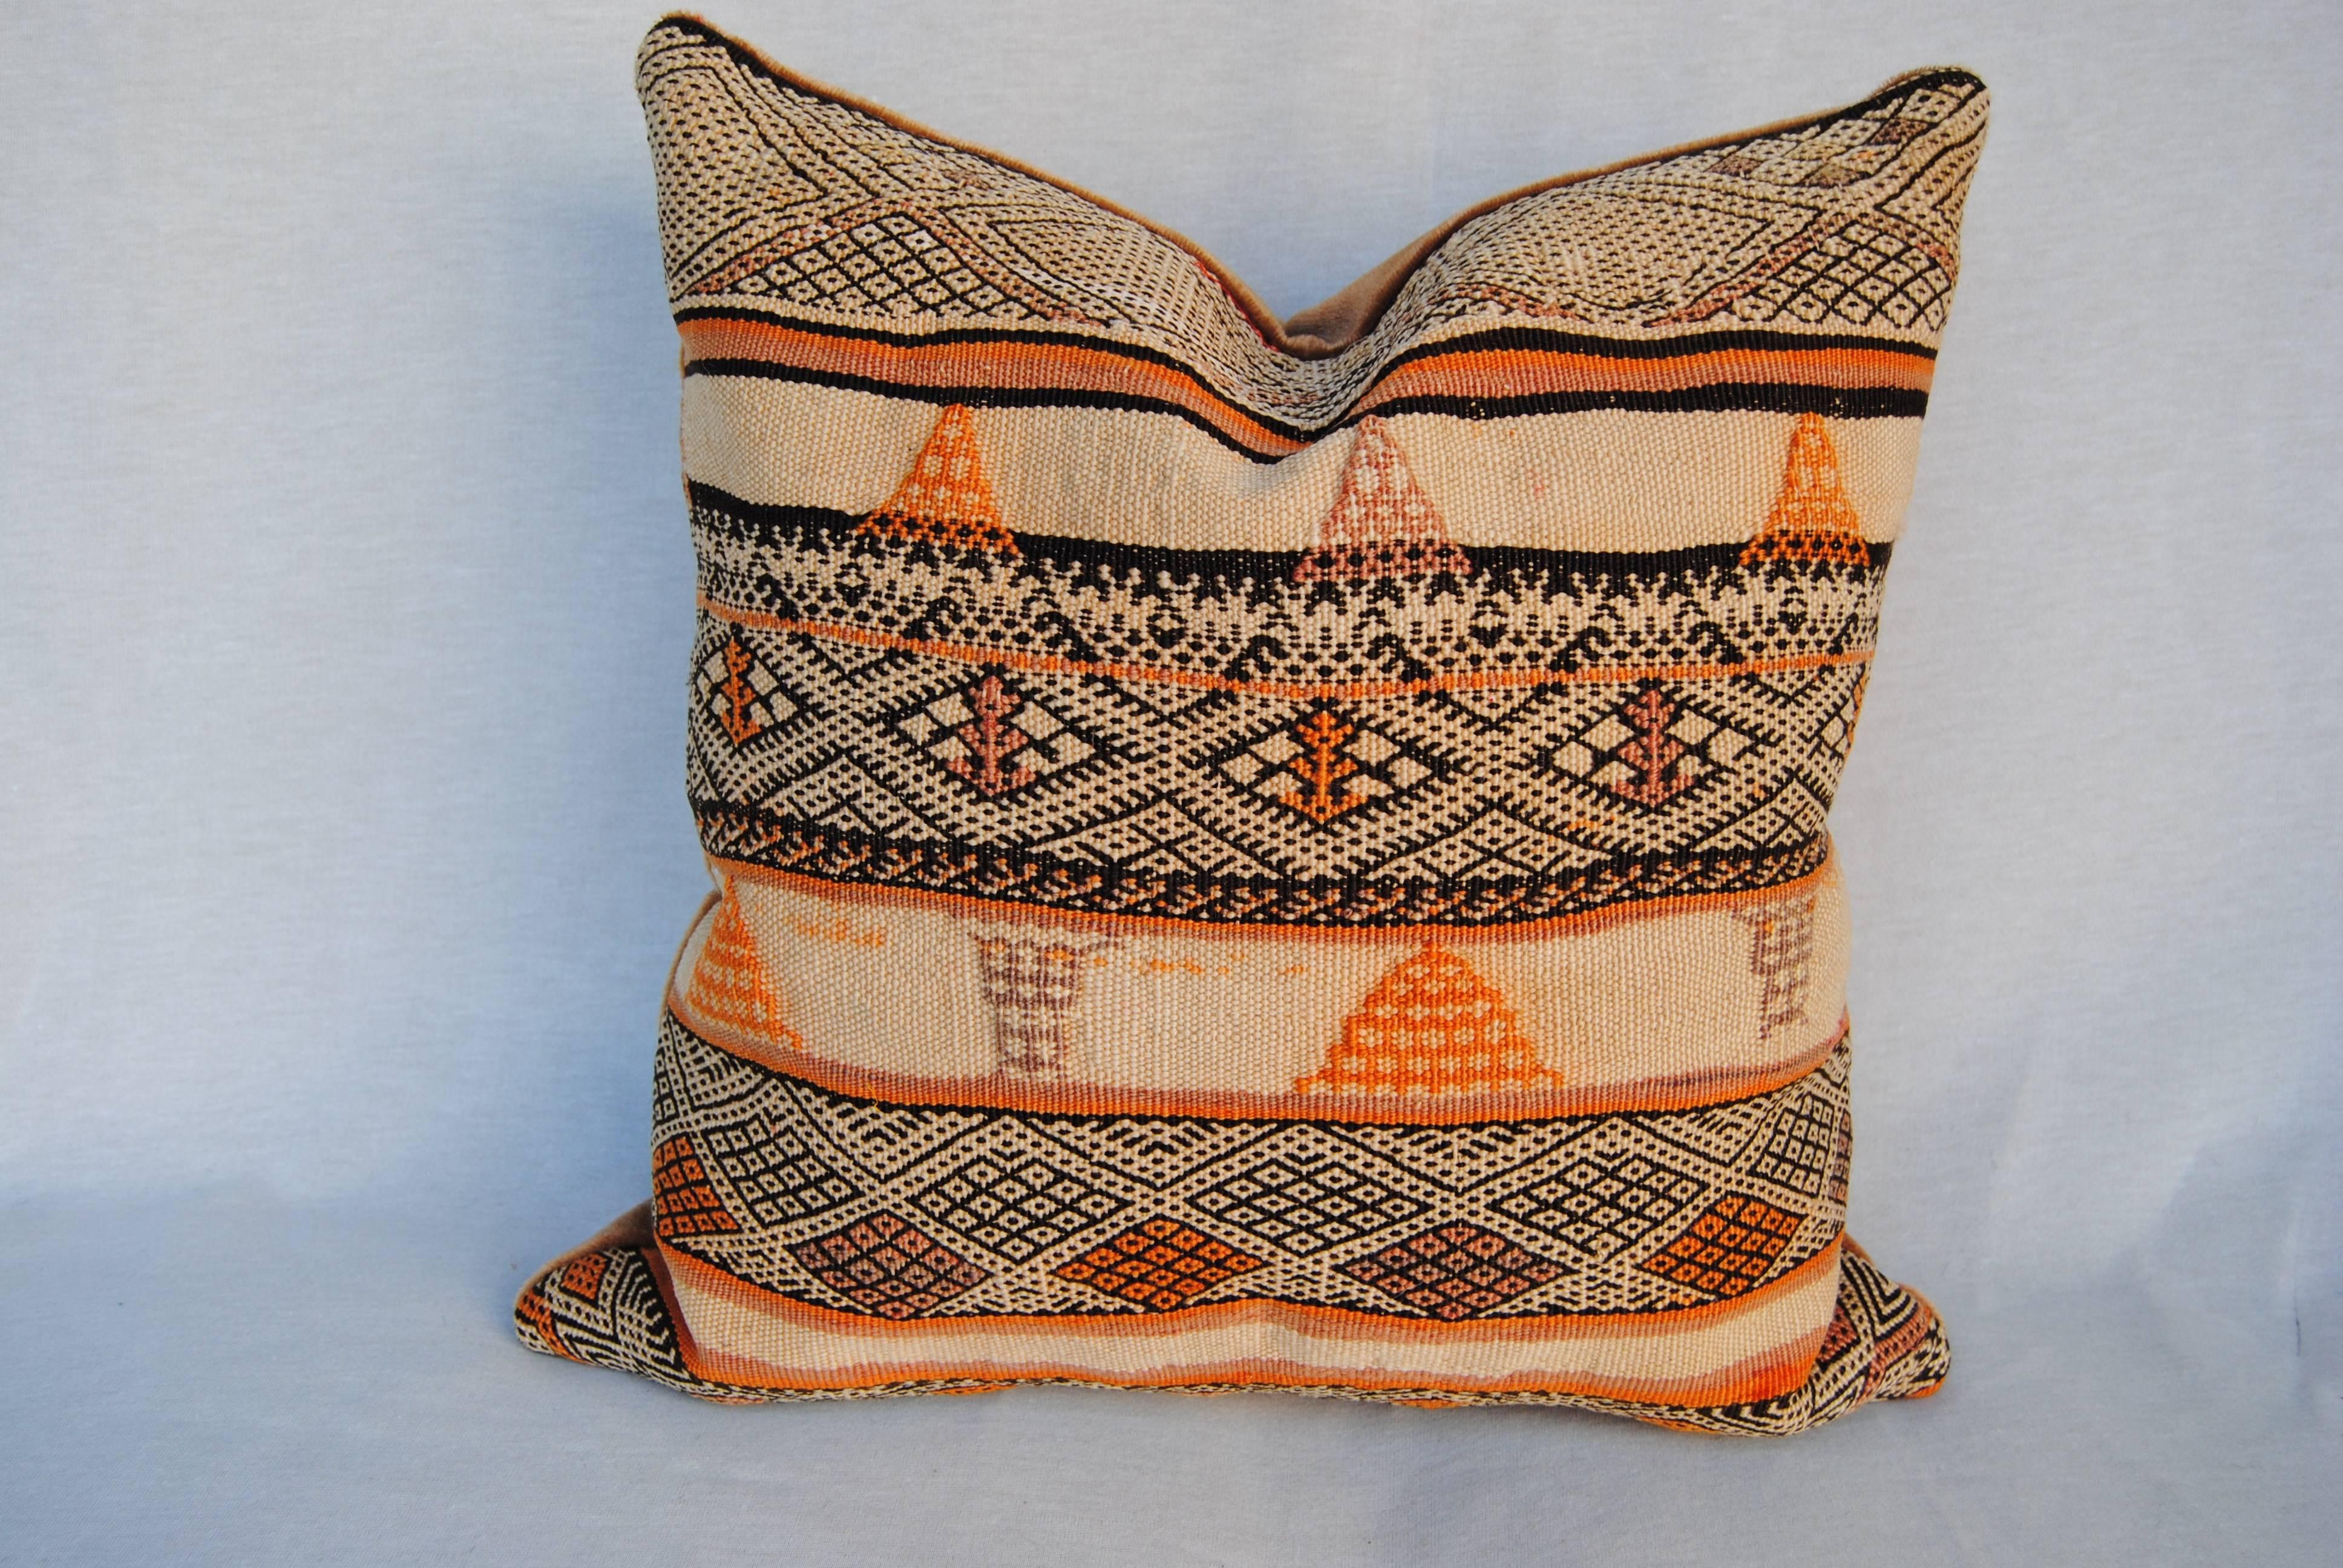 Custom pillow cut from a hand loomed wool Moroccan Berber rug from the Atlas Mountains. It is very heavy, thickly woven textile and was probably used as a large storage bag for bedding and clothes. All natural dyes. Pillow is backed in a mustard